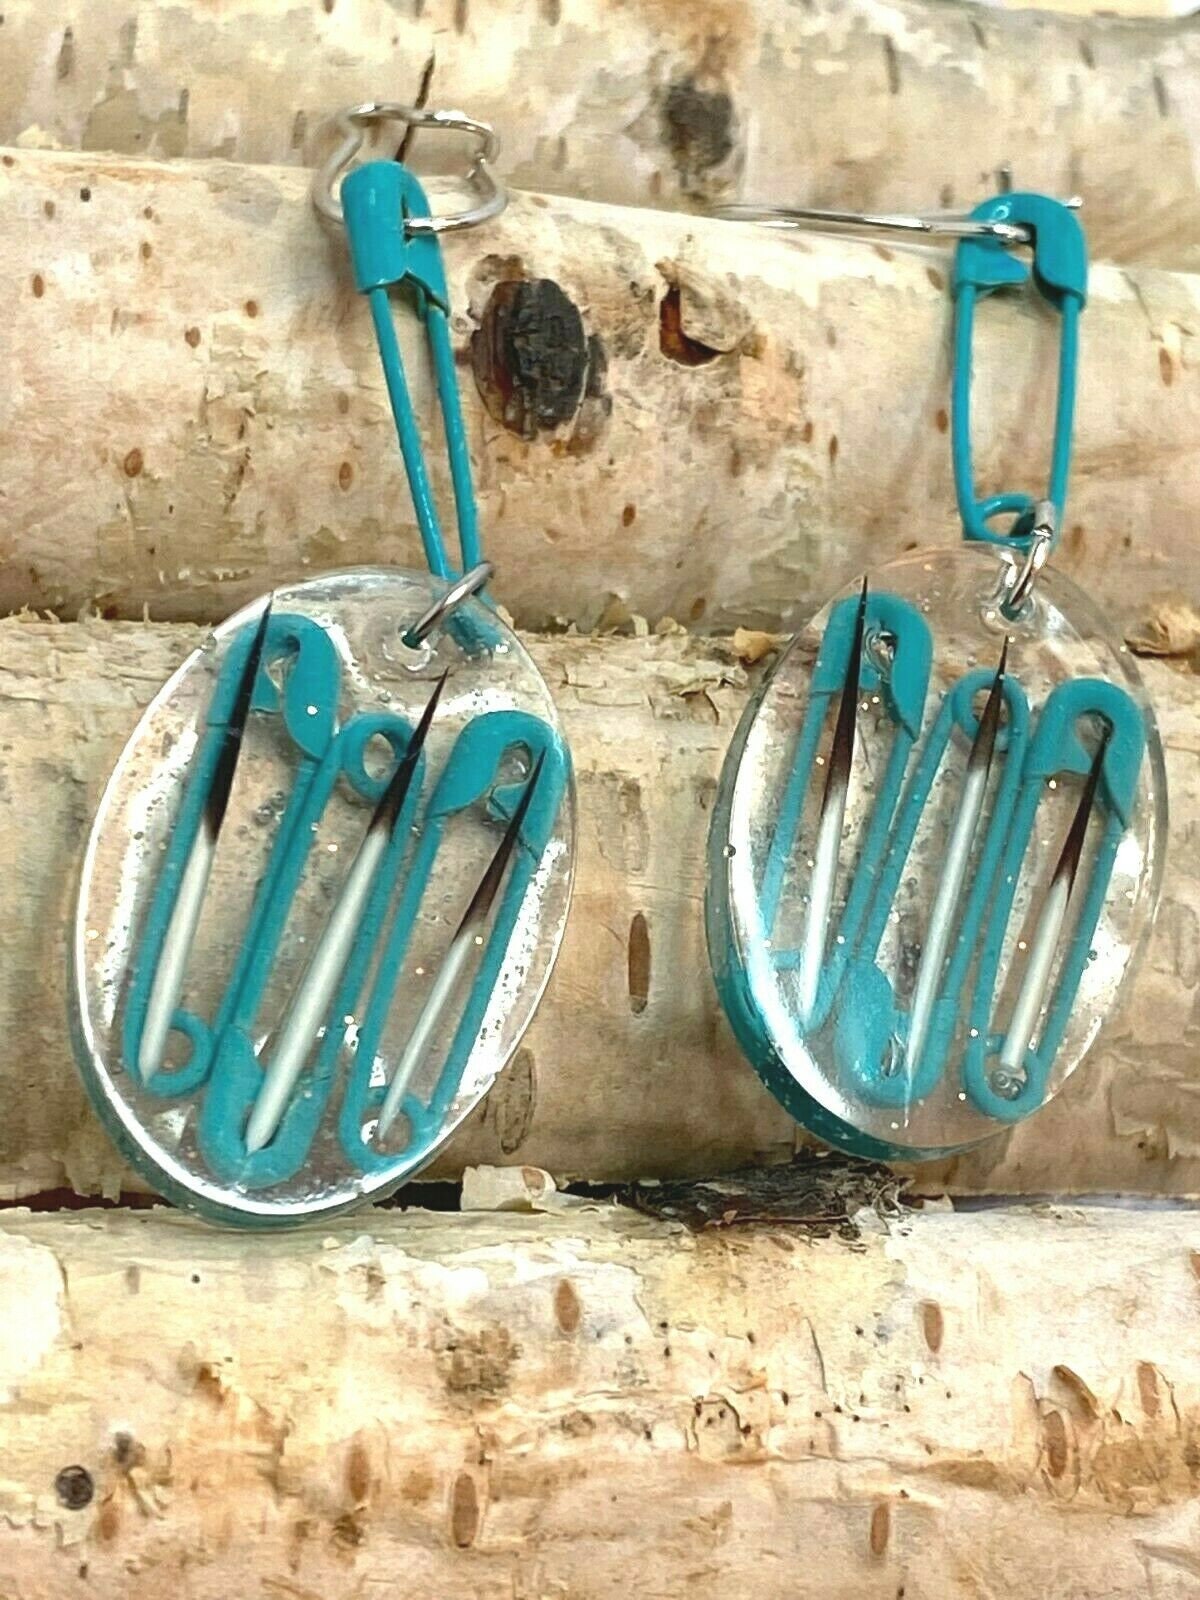 Handmade American Porcupine Quill Resin Earrings Turquoise Safety Pins, Oval Shaped, , Lightweight, Drop Dangle, Oregon Made.